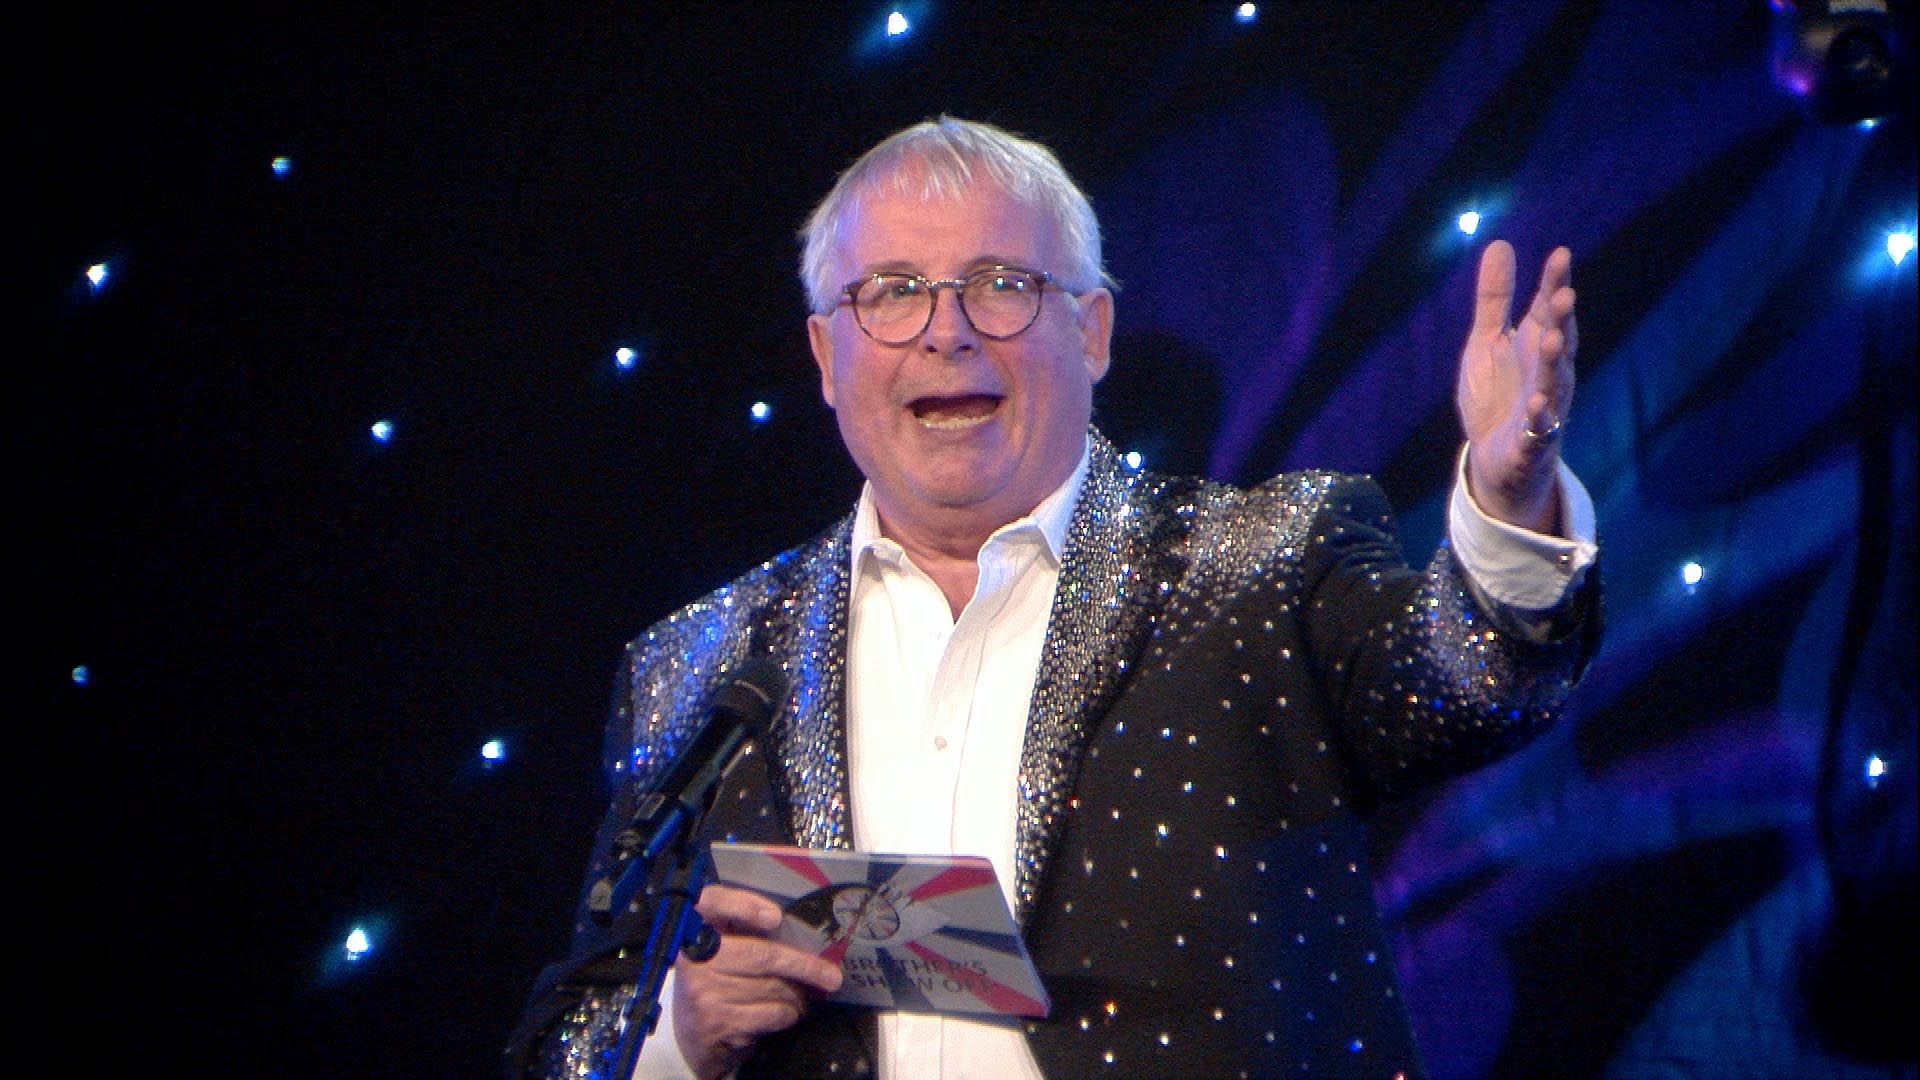 Ofcom clear CBB over Christopher Biggins’ bisexual comments